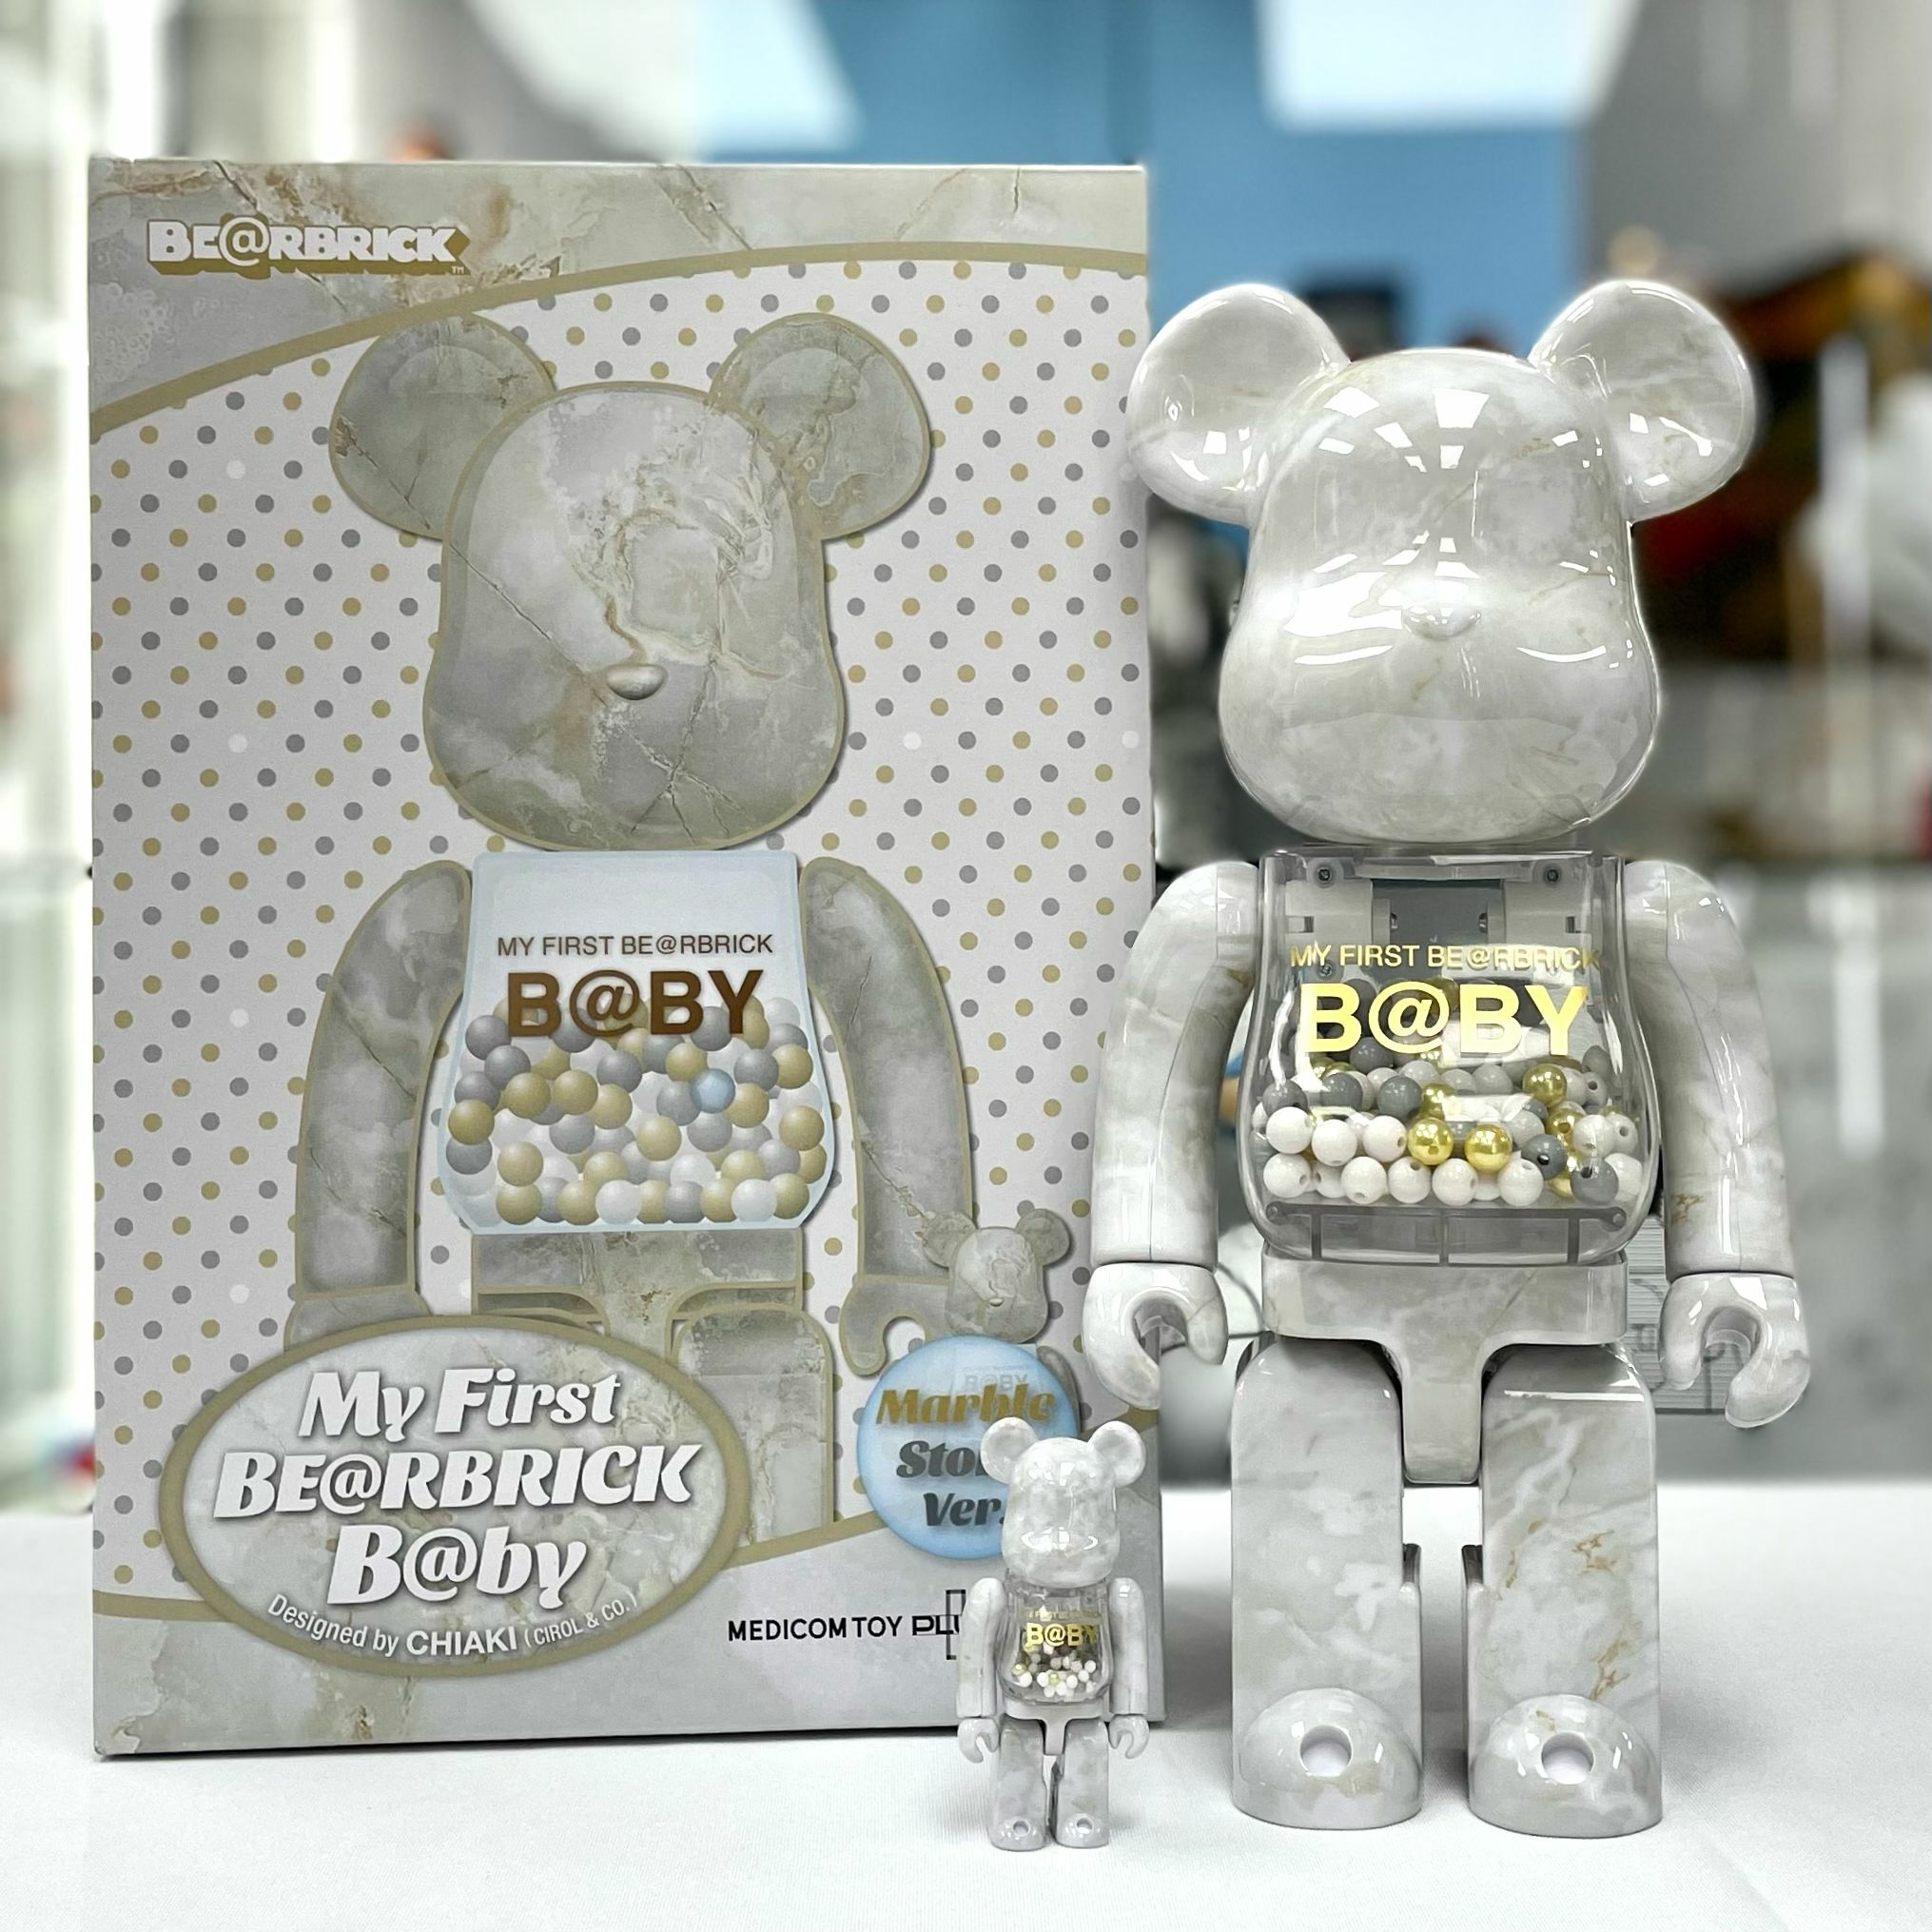 MY FIRST BE@RBRICK B@BY MARBLE Ver.1000％ | www.victoriartilloedm.com